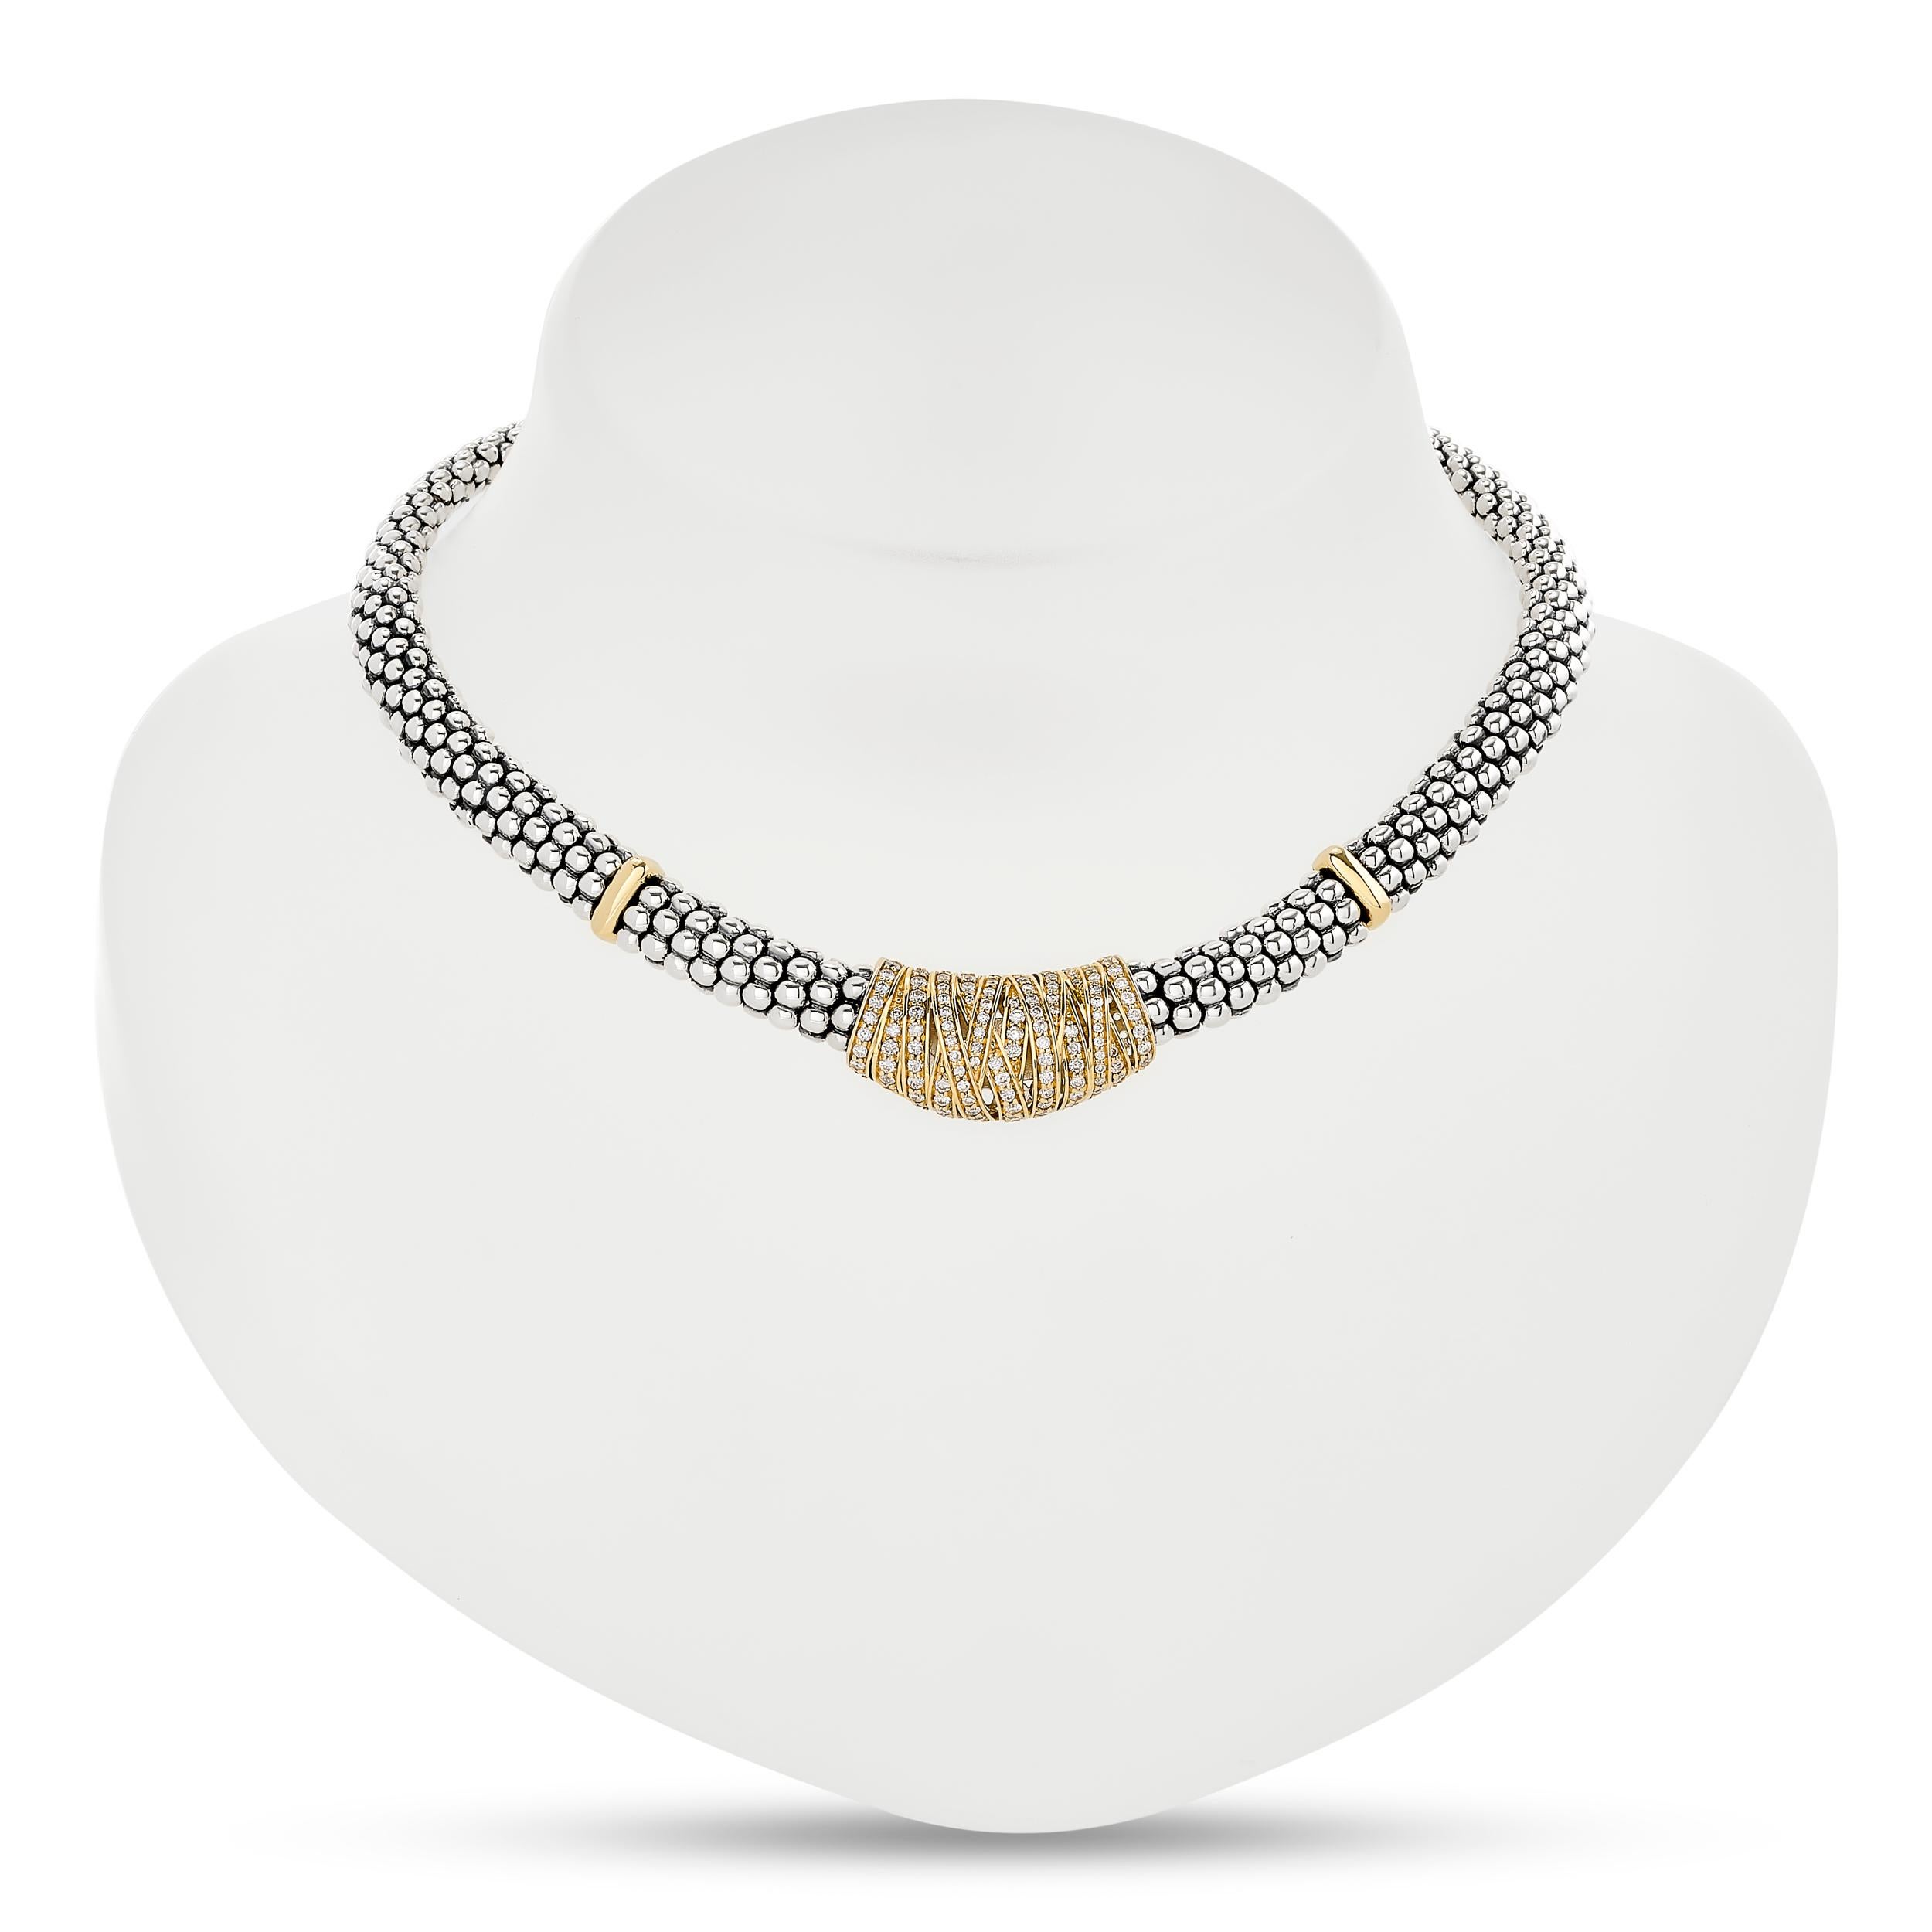 A LAGOS silver and 18 karat yellow gold caviar necklace, embellished with dazzling diamonds.
133 round diamonds that weigh approximately 1.00 carat; the diamonds are H-I color and SI1-I1 clarity.

Approximately 15 inches.
Necklace is stamped: